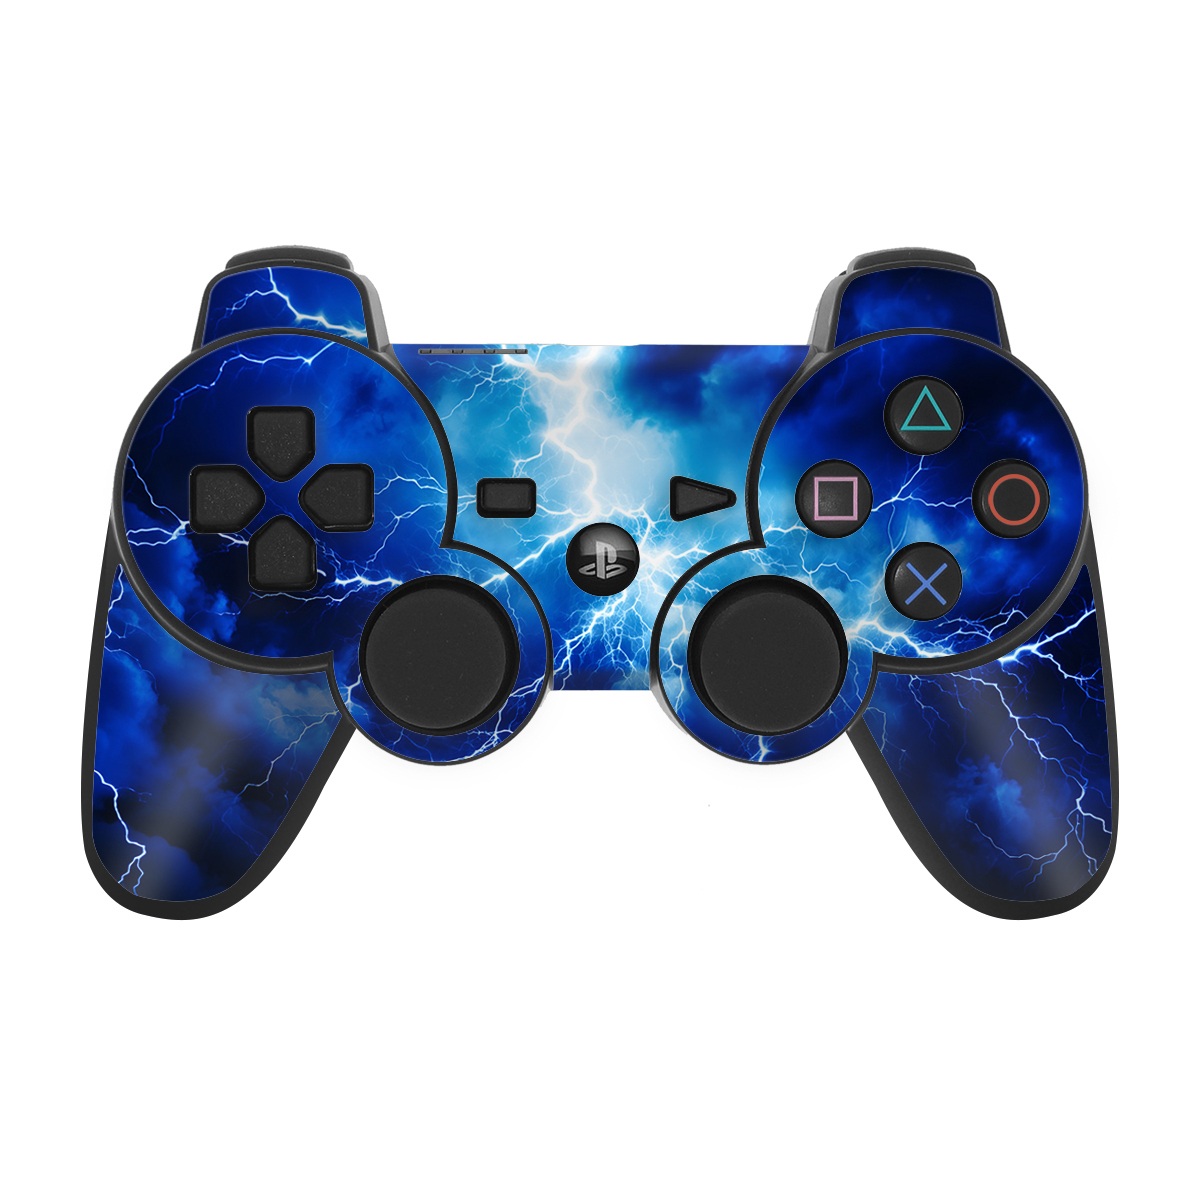 PS3 Controller Skin design of Thunder, Sky, Atmosphere, Daytime, Cloud, Water, Lightning, Light, Azure, Natural environment, with black, blue colors